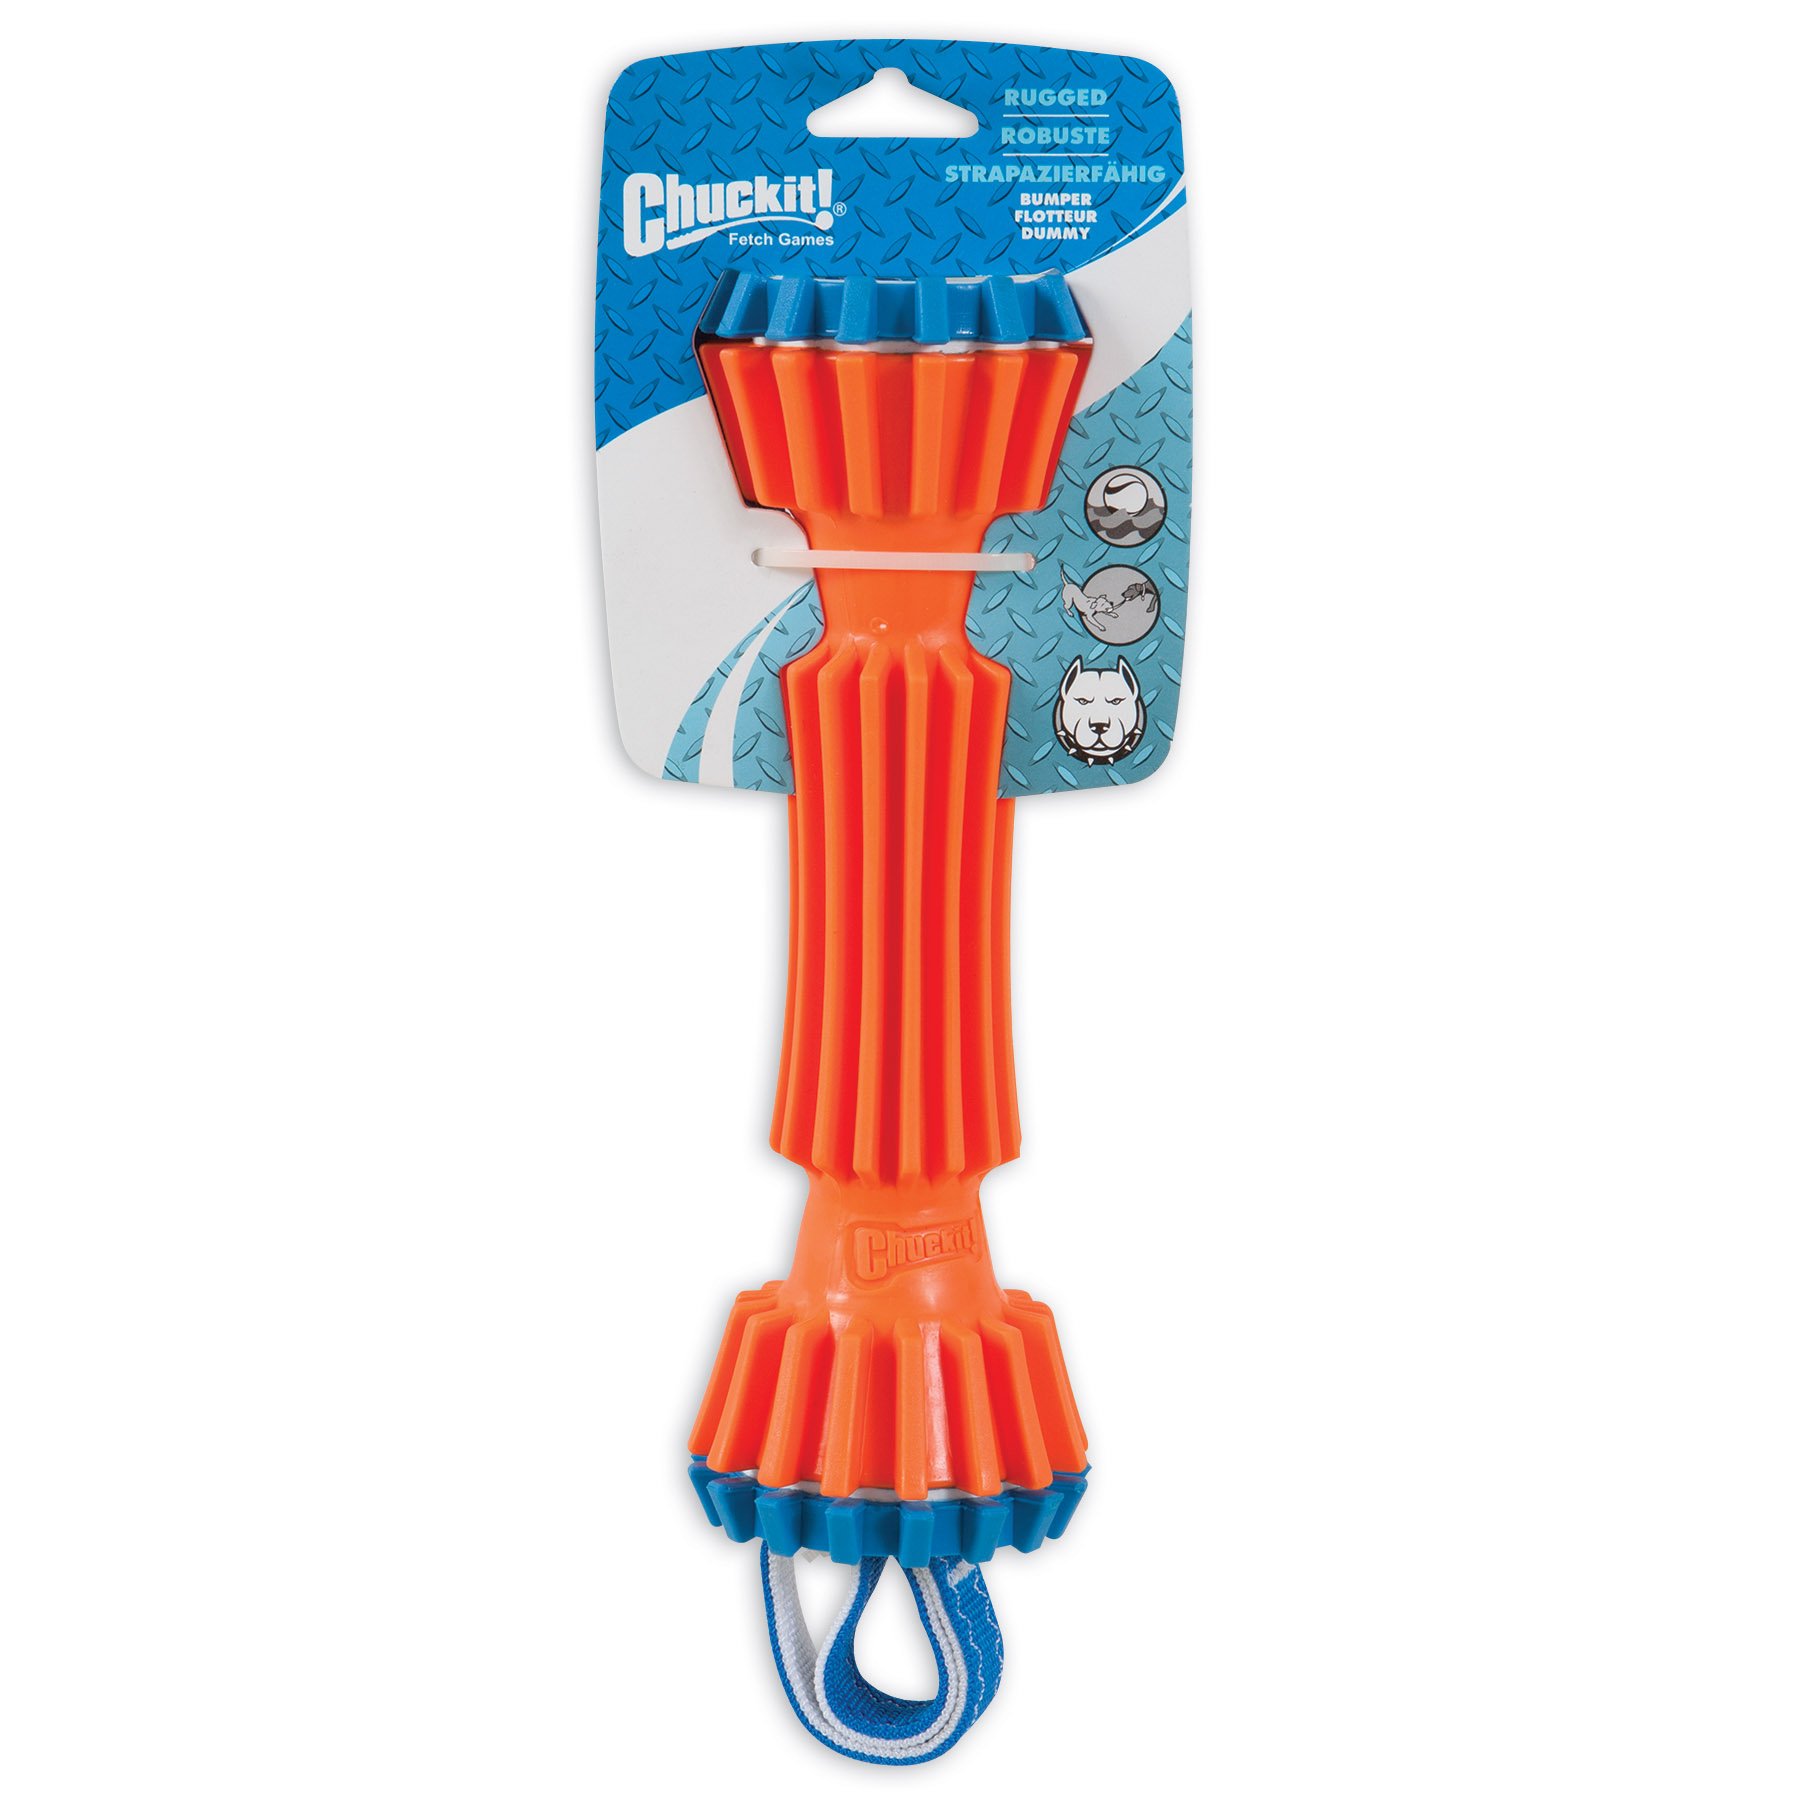 ChuckIt! Rugged Bumper Dog Toy (Medium) $7.60 w/ S&S + Free Shipping w/ Prime or on $35+